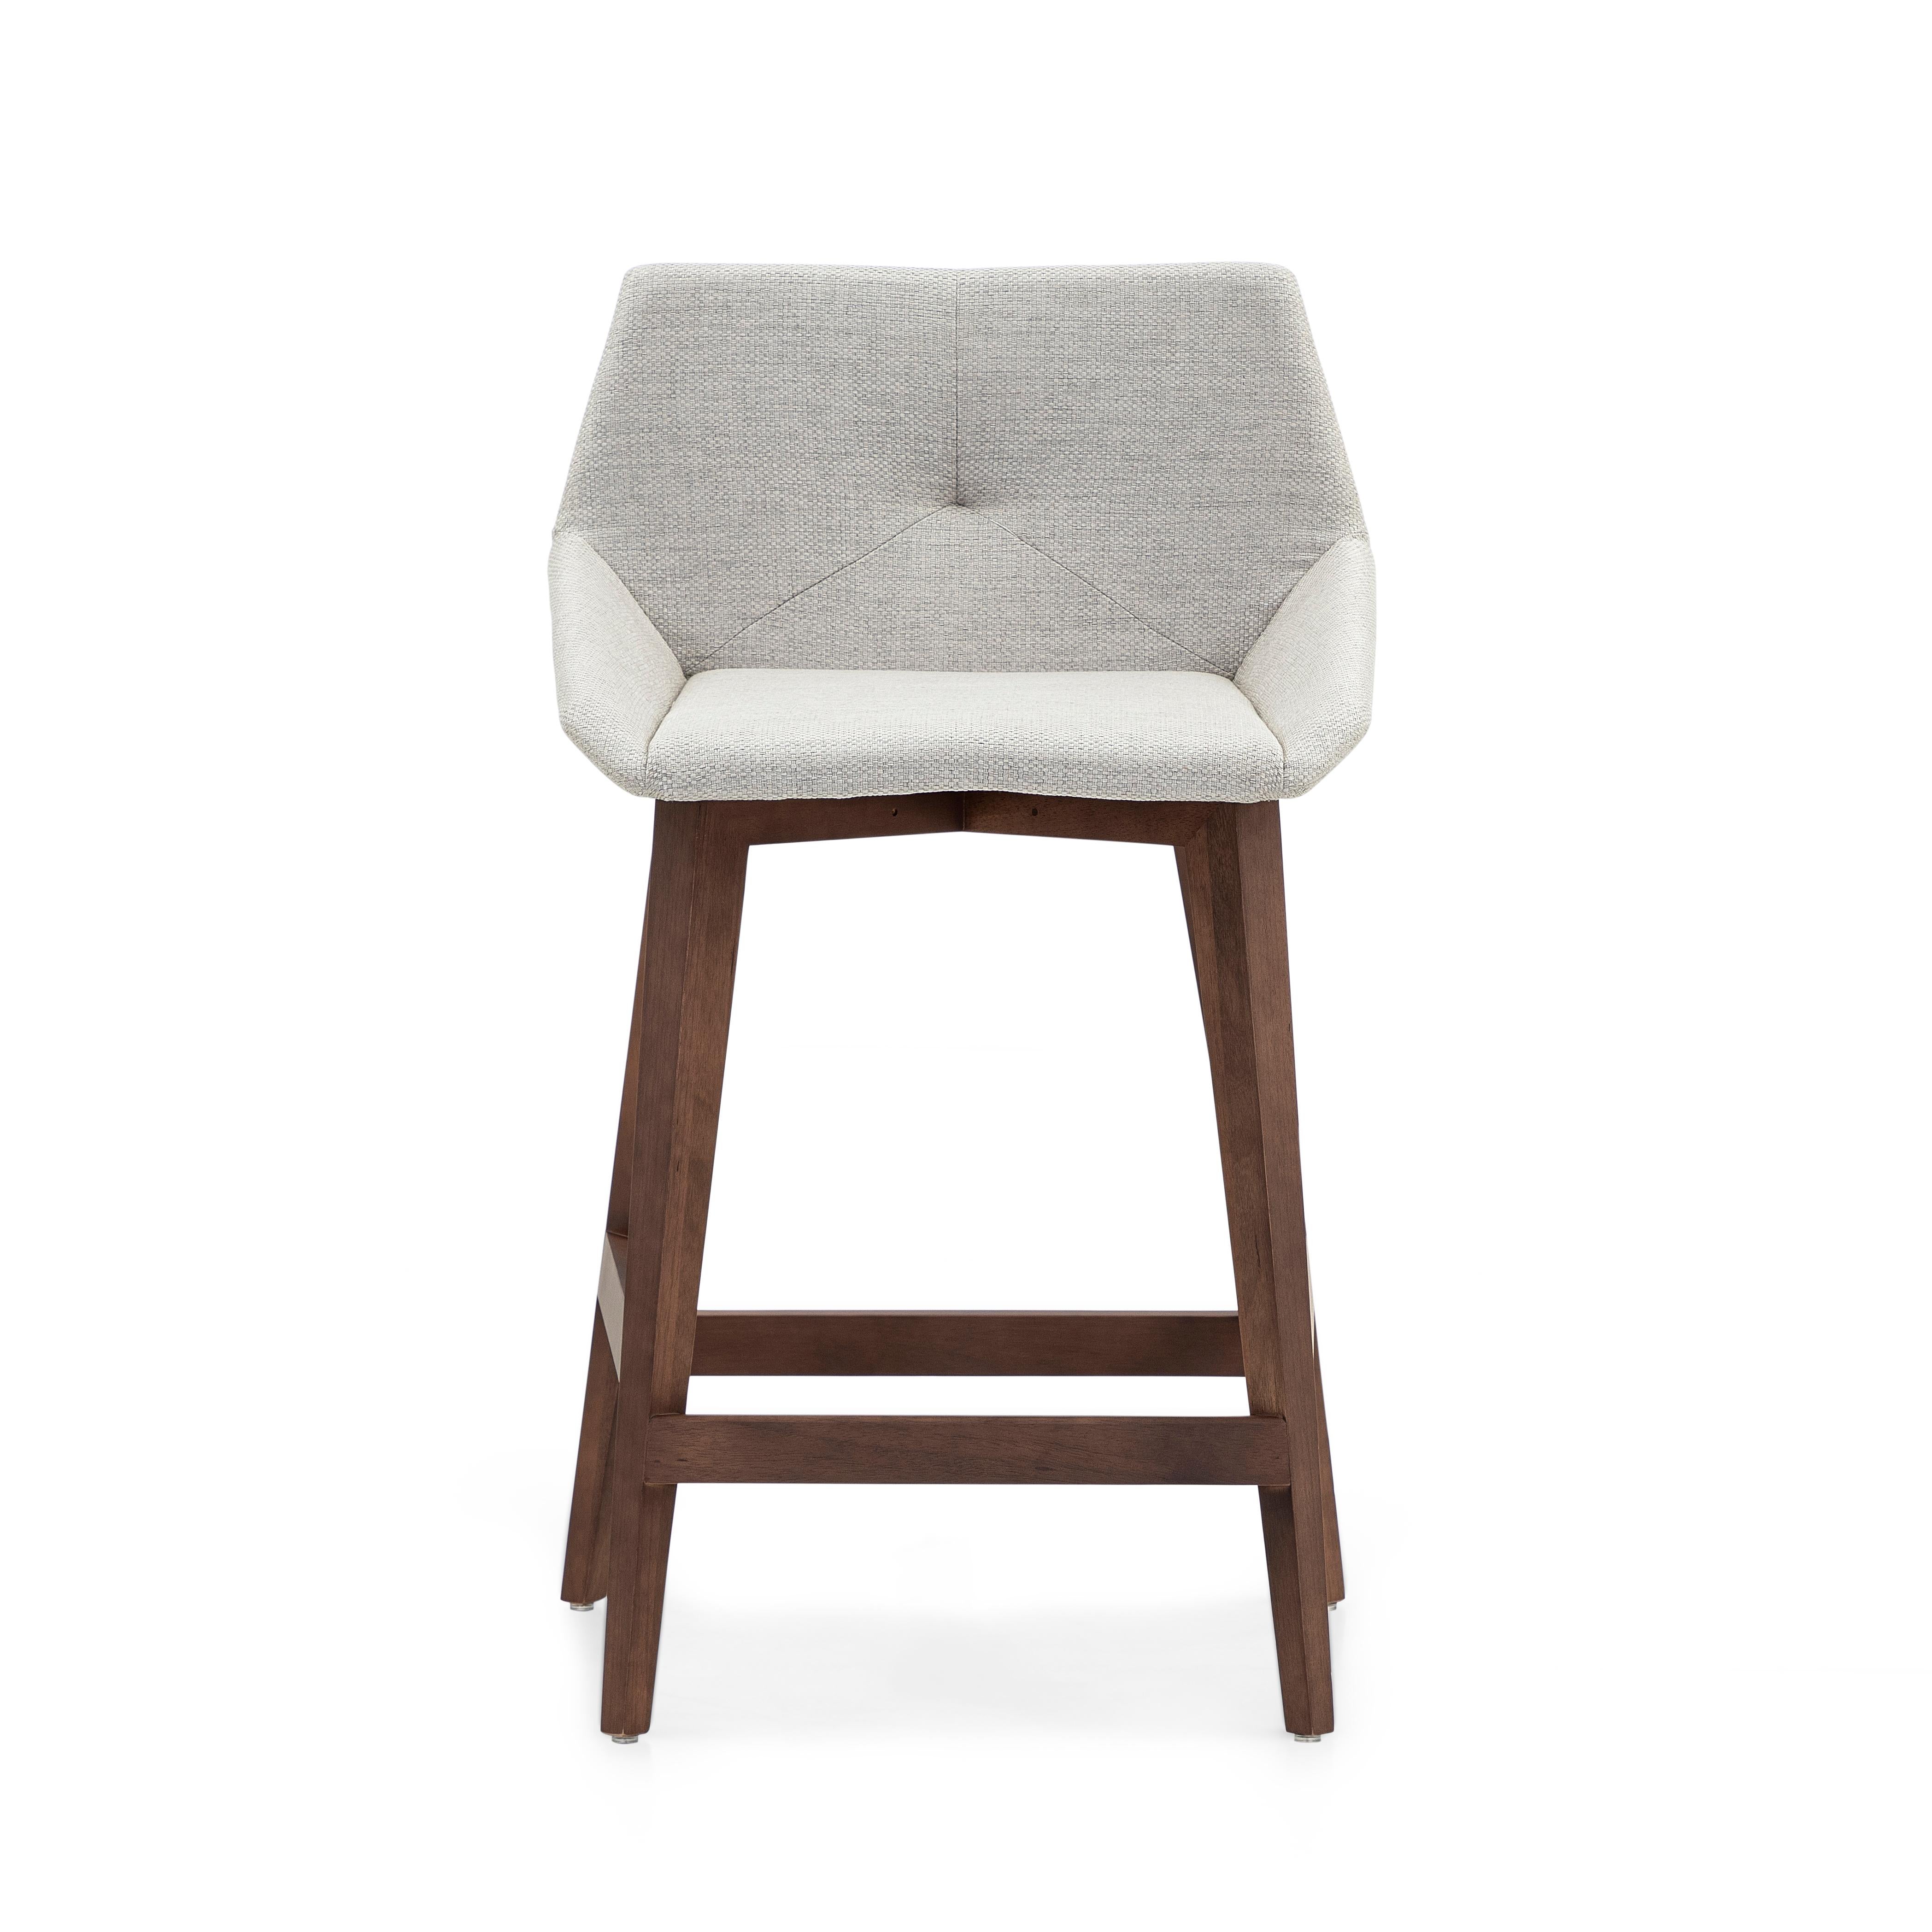 Upholstery Geometric Cubi Counter Stool Walnut Wood Base and Off-White Fabric Seat For Sale